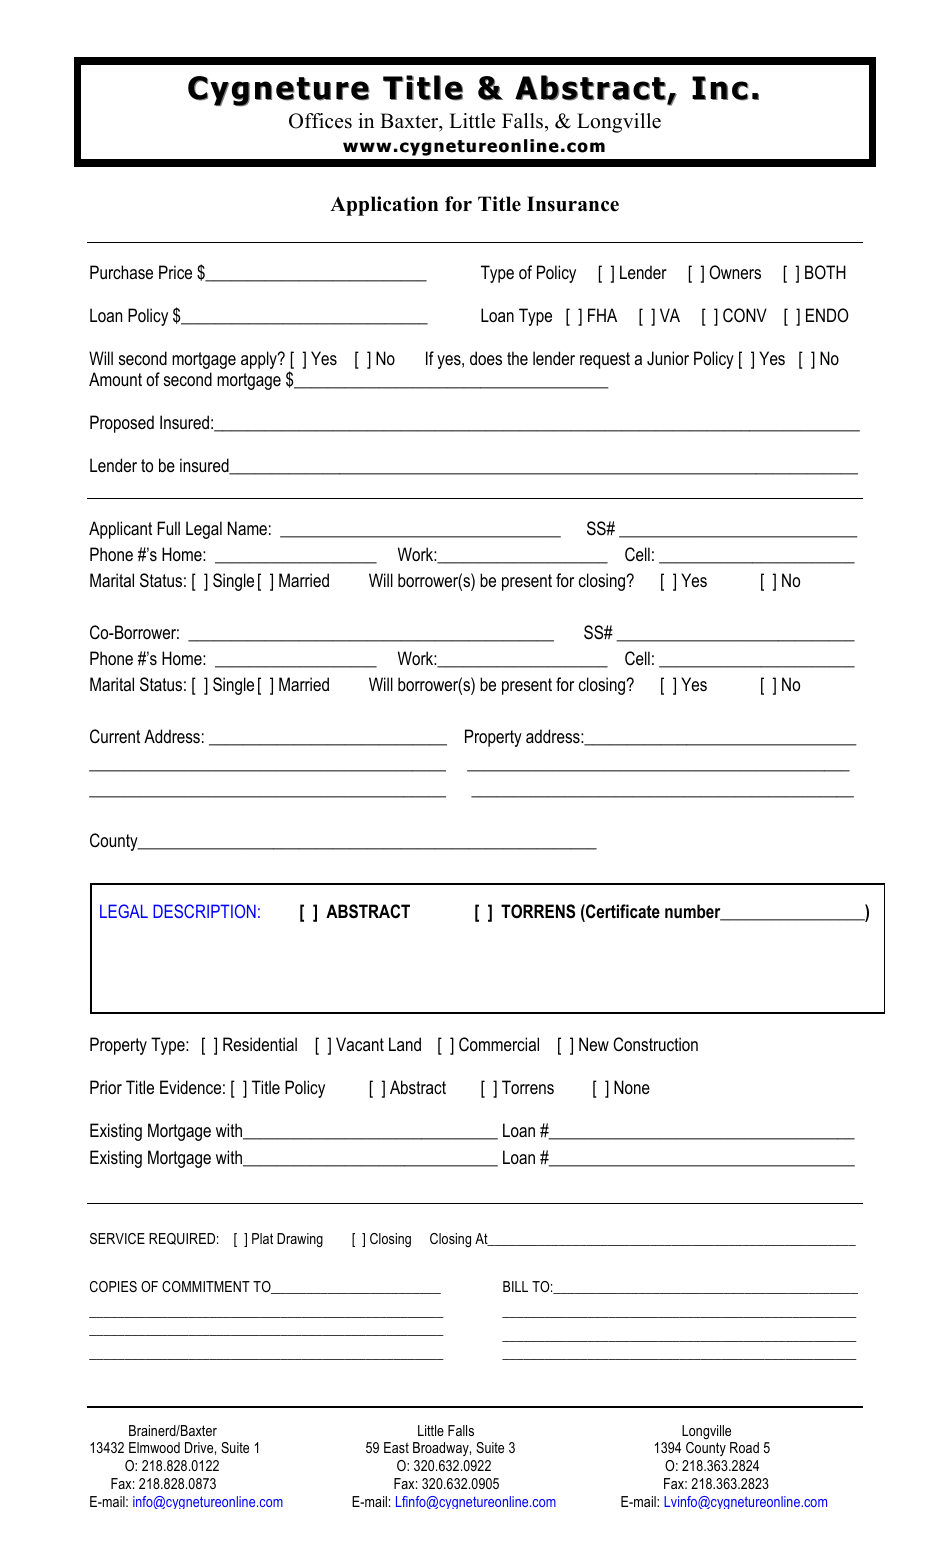 Title Insurance Application Form - Cygneture Title  Abstract, Inc., Page 1